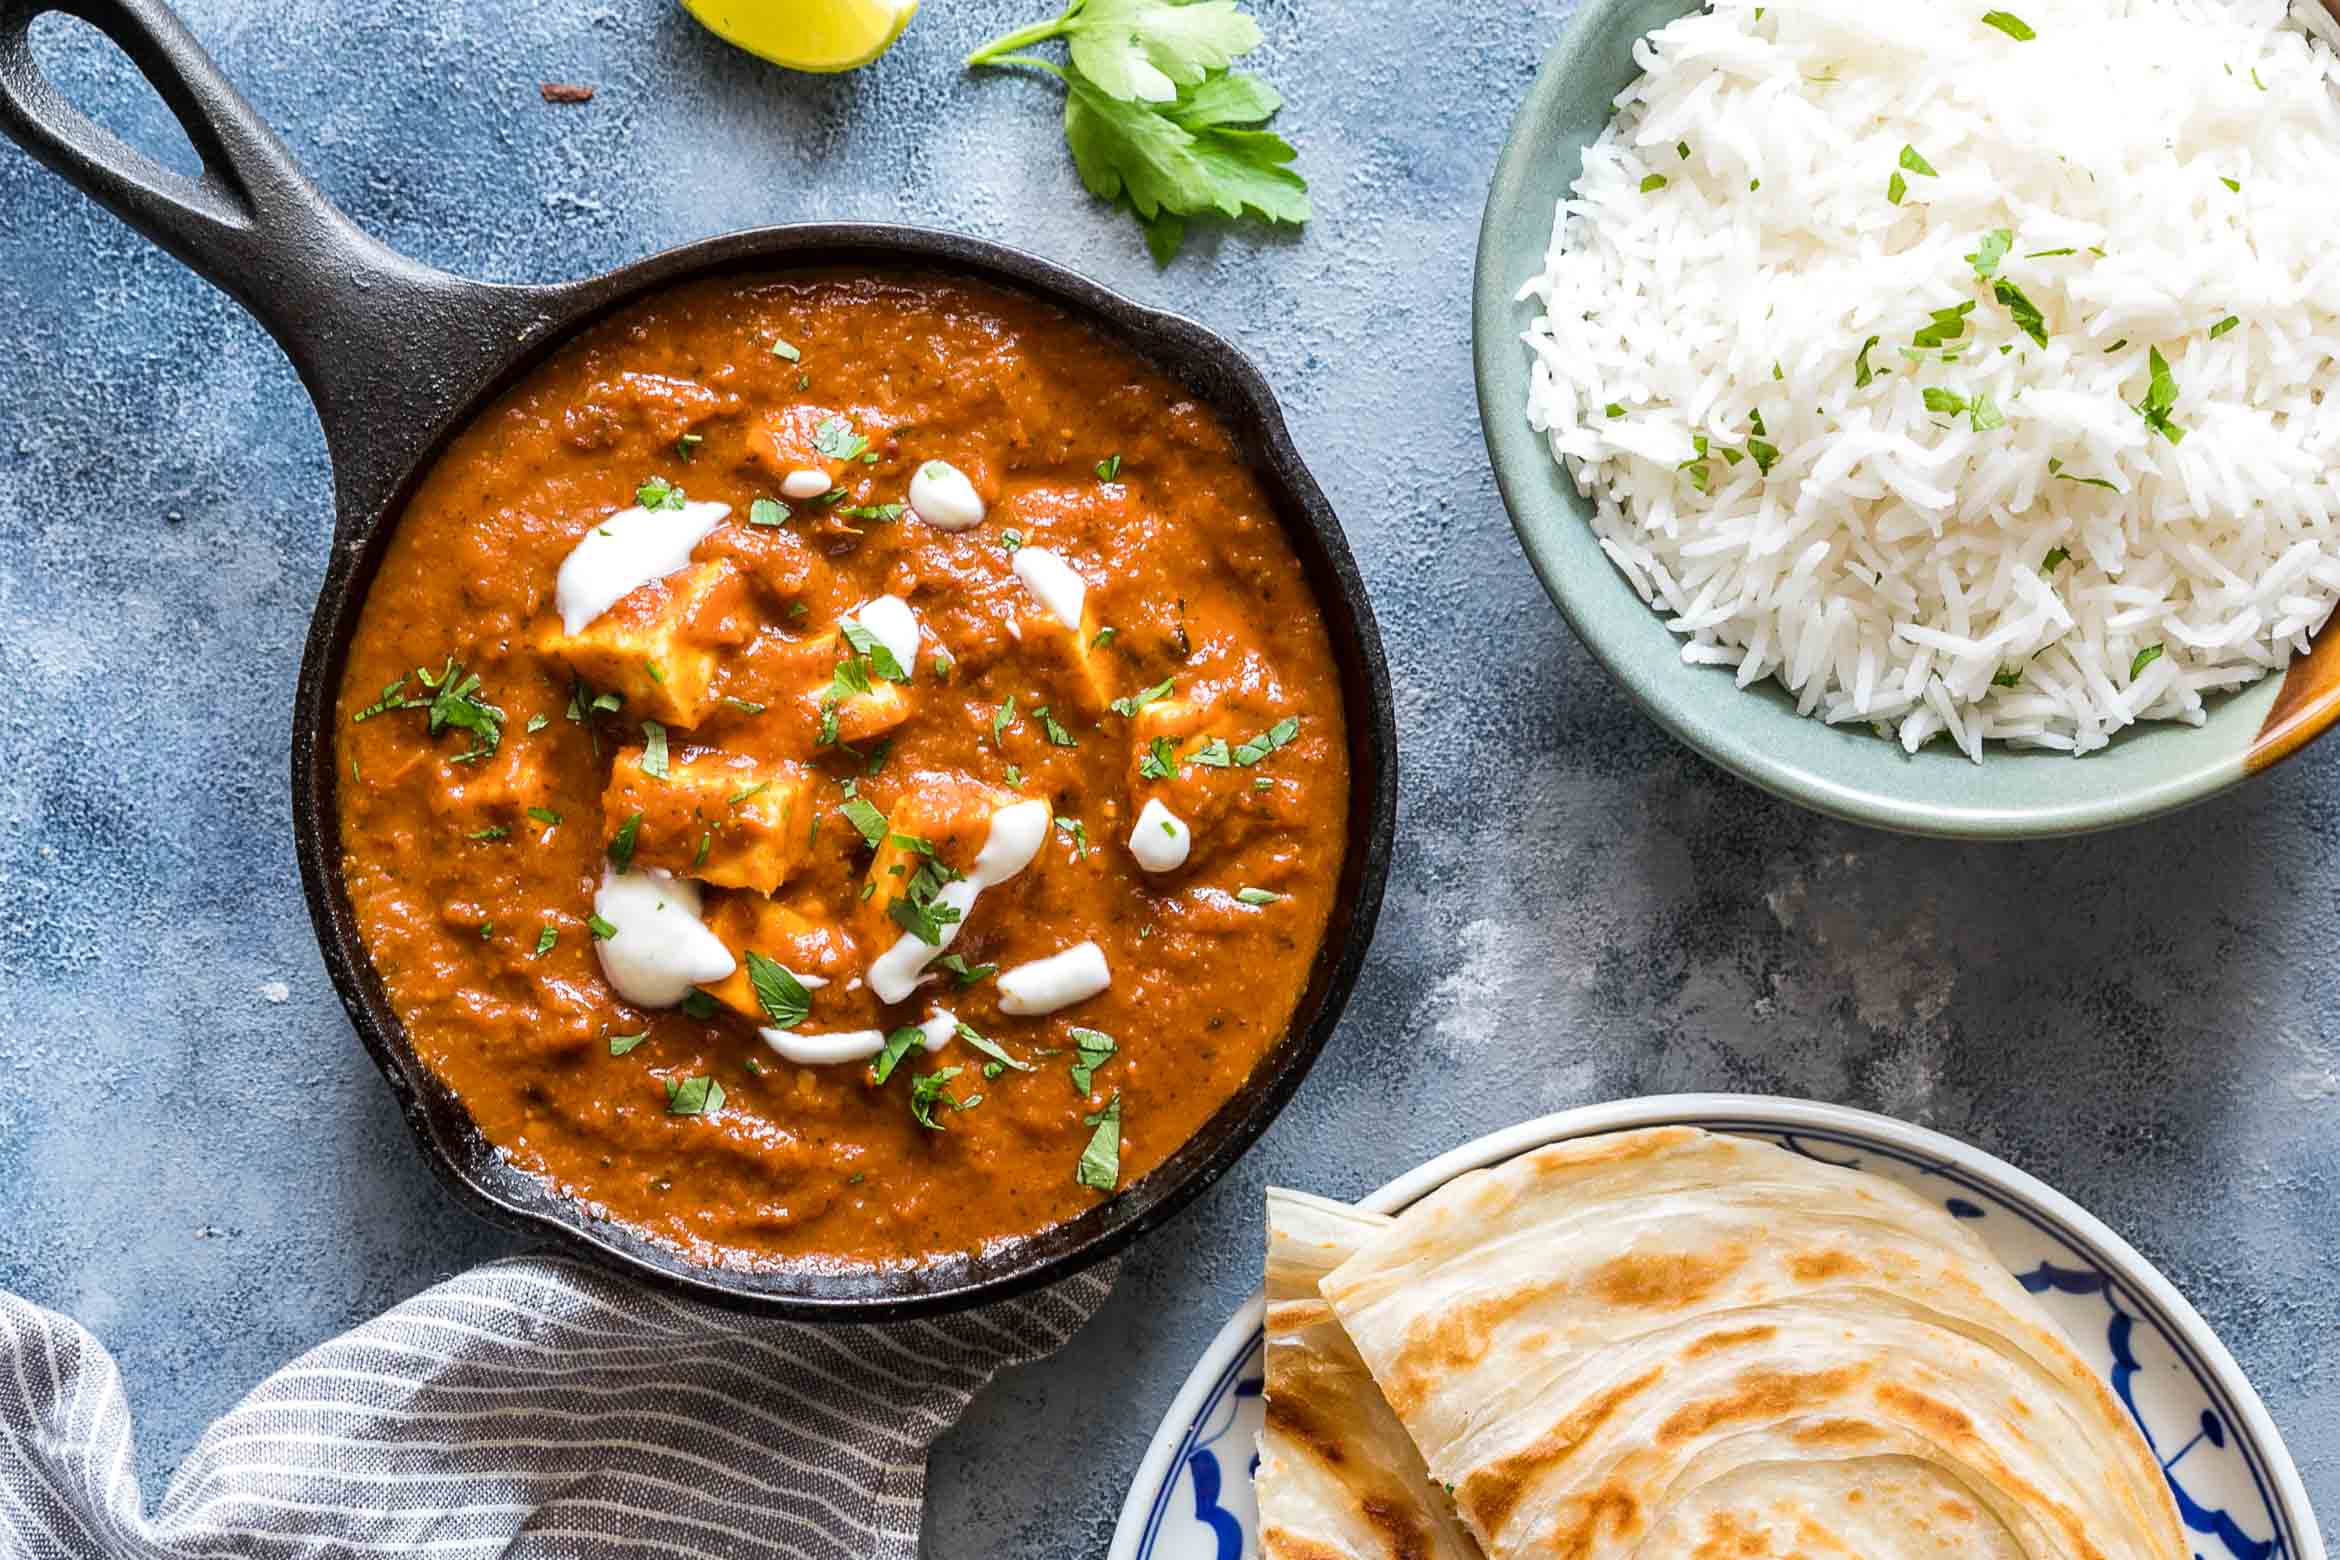 Here's an easy recipe for the perfect restaurant style paneer butter masala for all you paneer (cottage cheese) lovers! I love serving this with parathas and jeera rice. It's always a hit with family and guests!